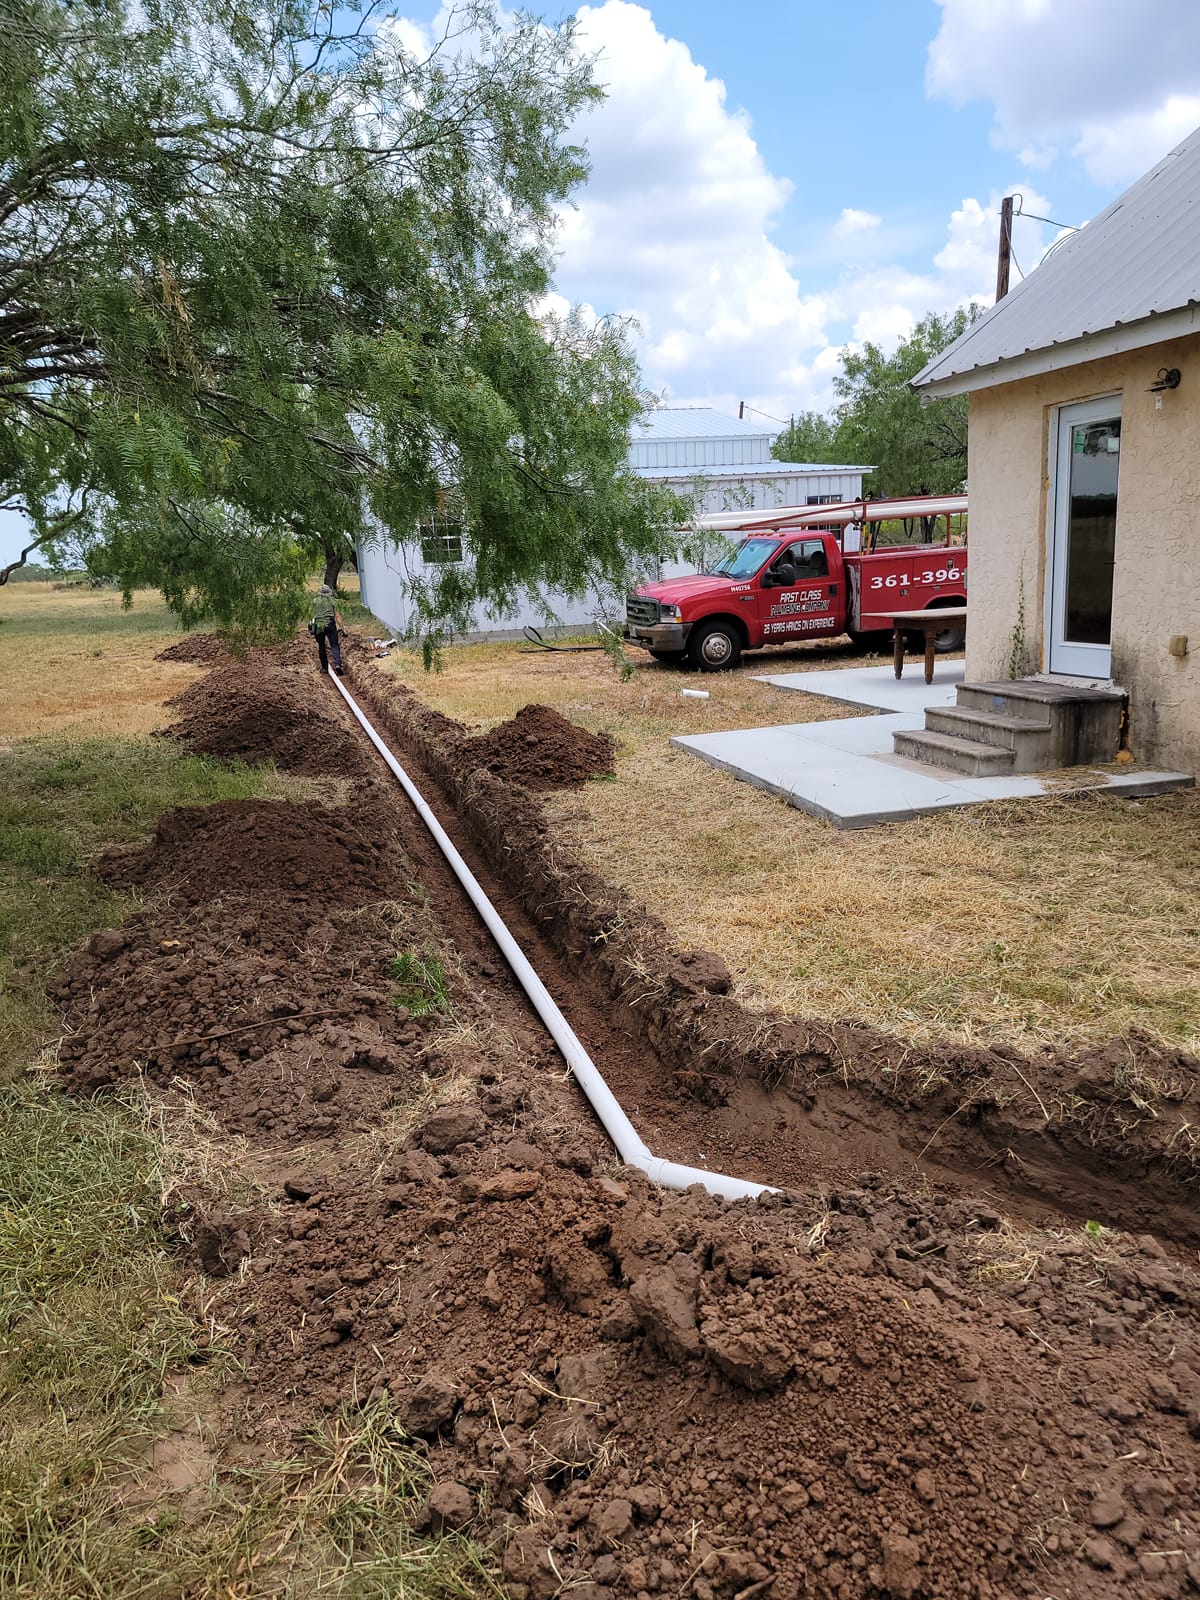 Sewage Pipe in trench beside home